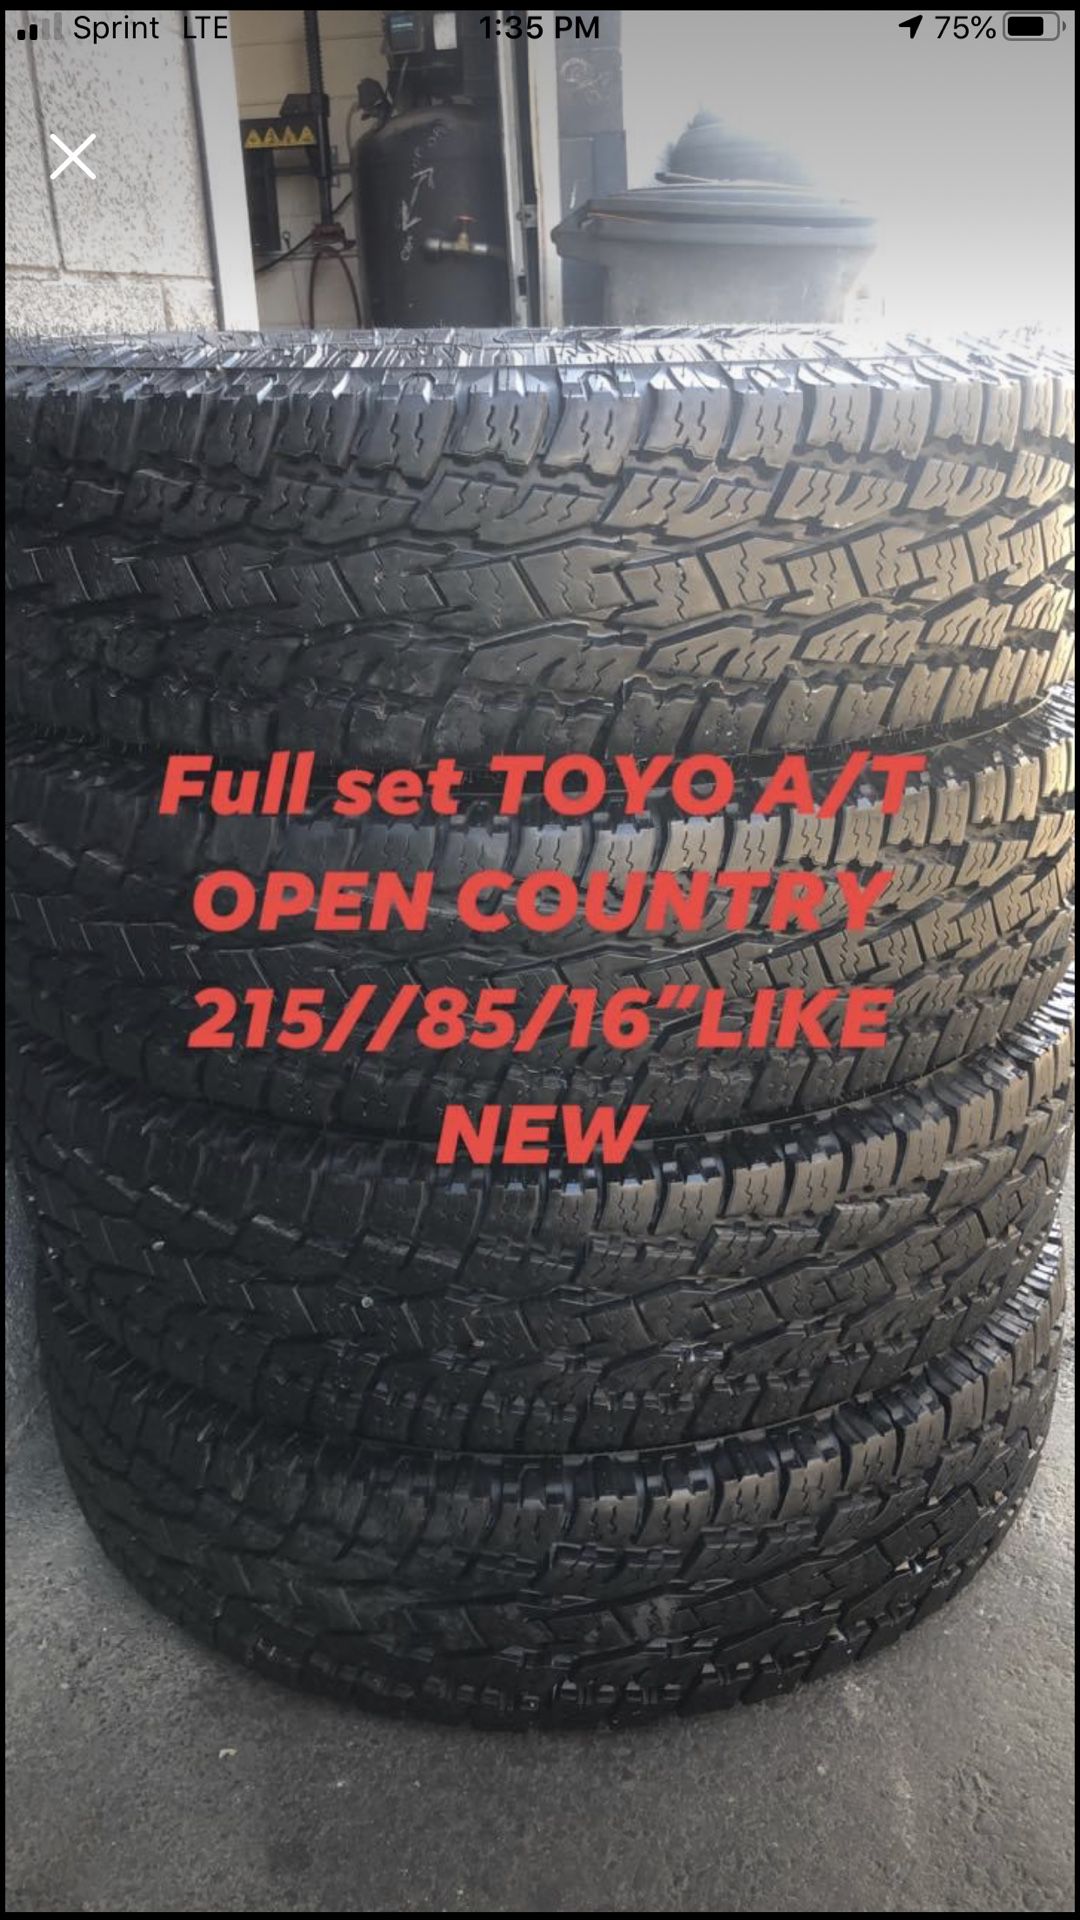 Full set TOYO open country215/85/16 like new